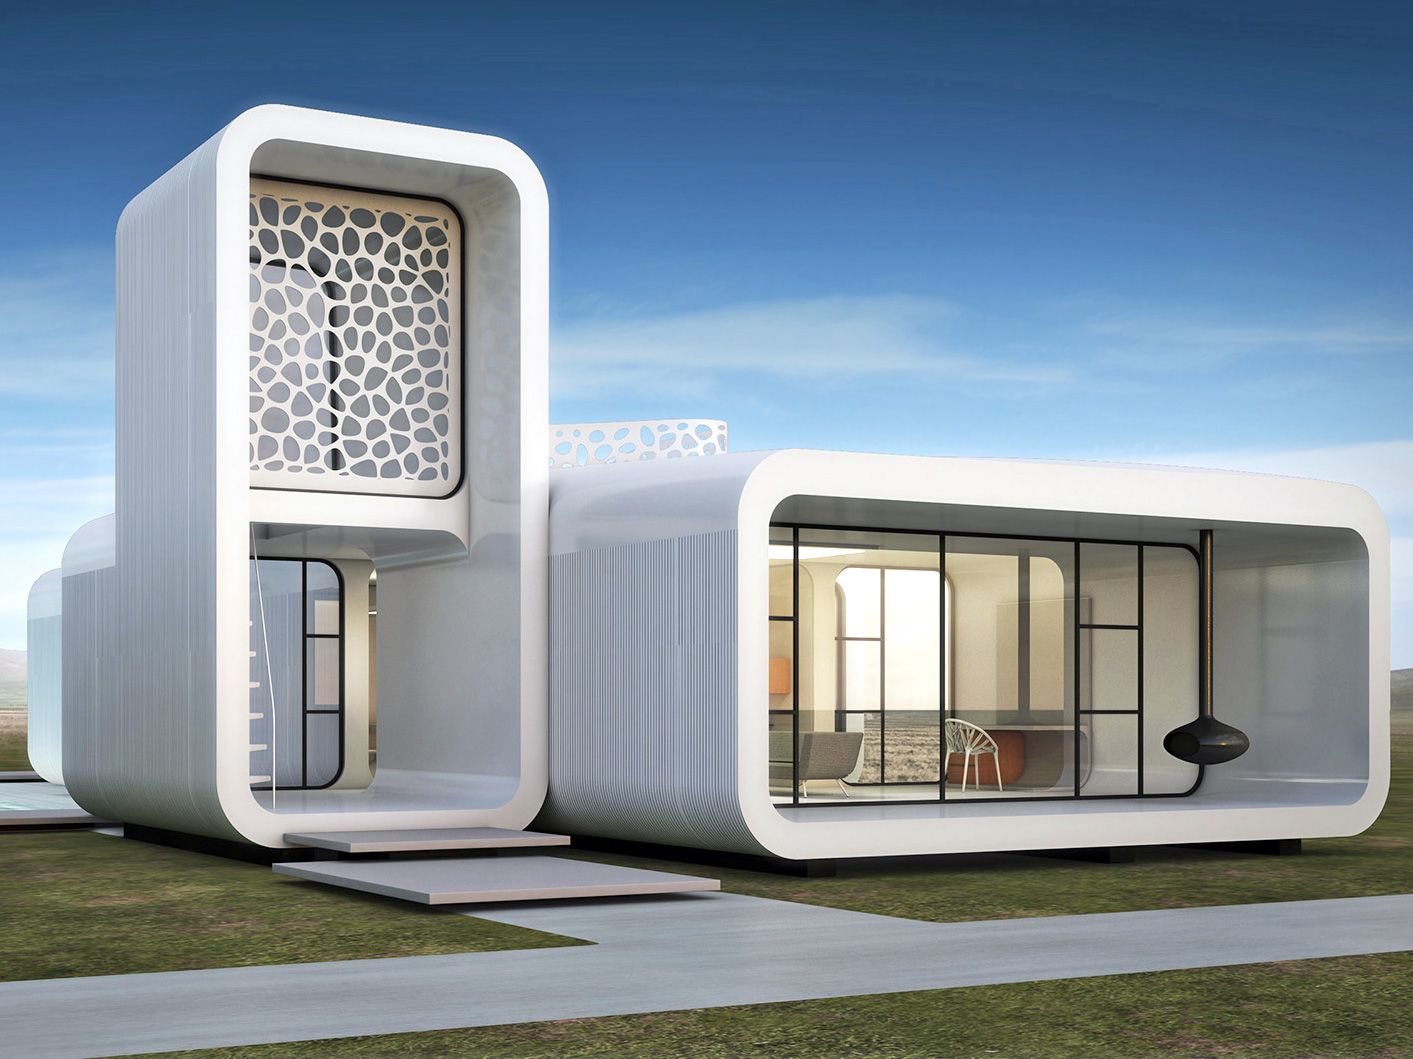 Armstrong beløb Staple Is the Building of the Future 3D-printed?